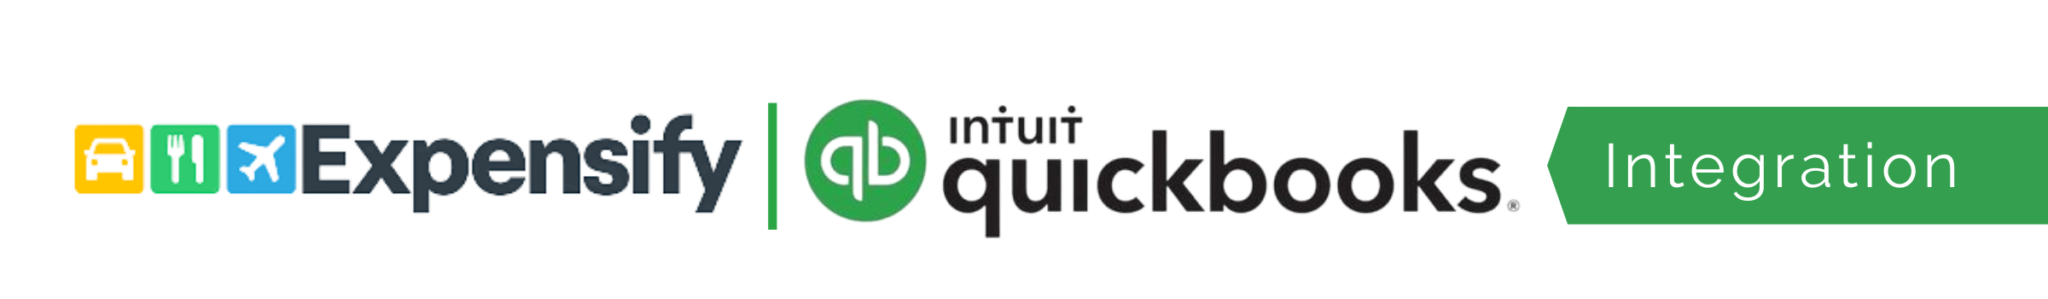 Expensify and Quickbooks Integration